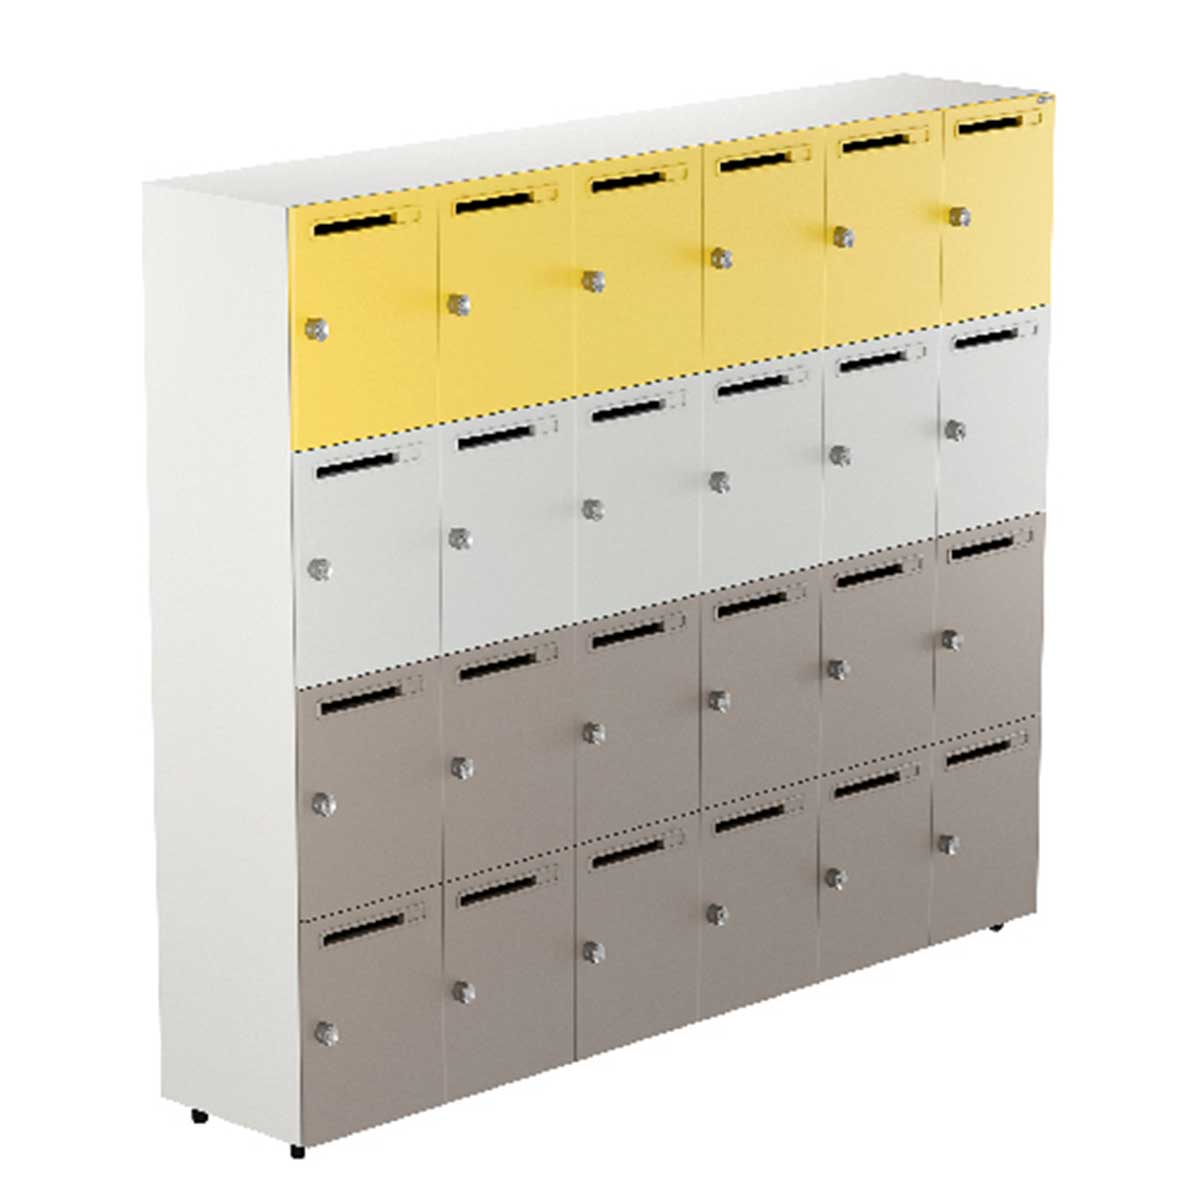 Storage Lockers Manufacturers, Suppliers in Faridabad Sector 14